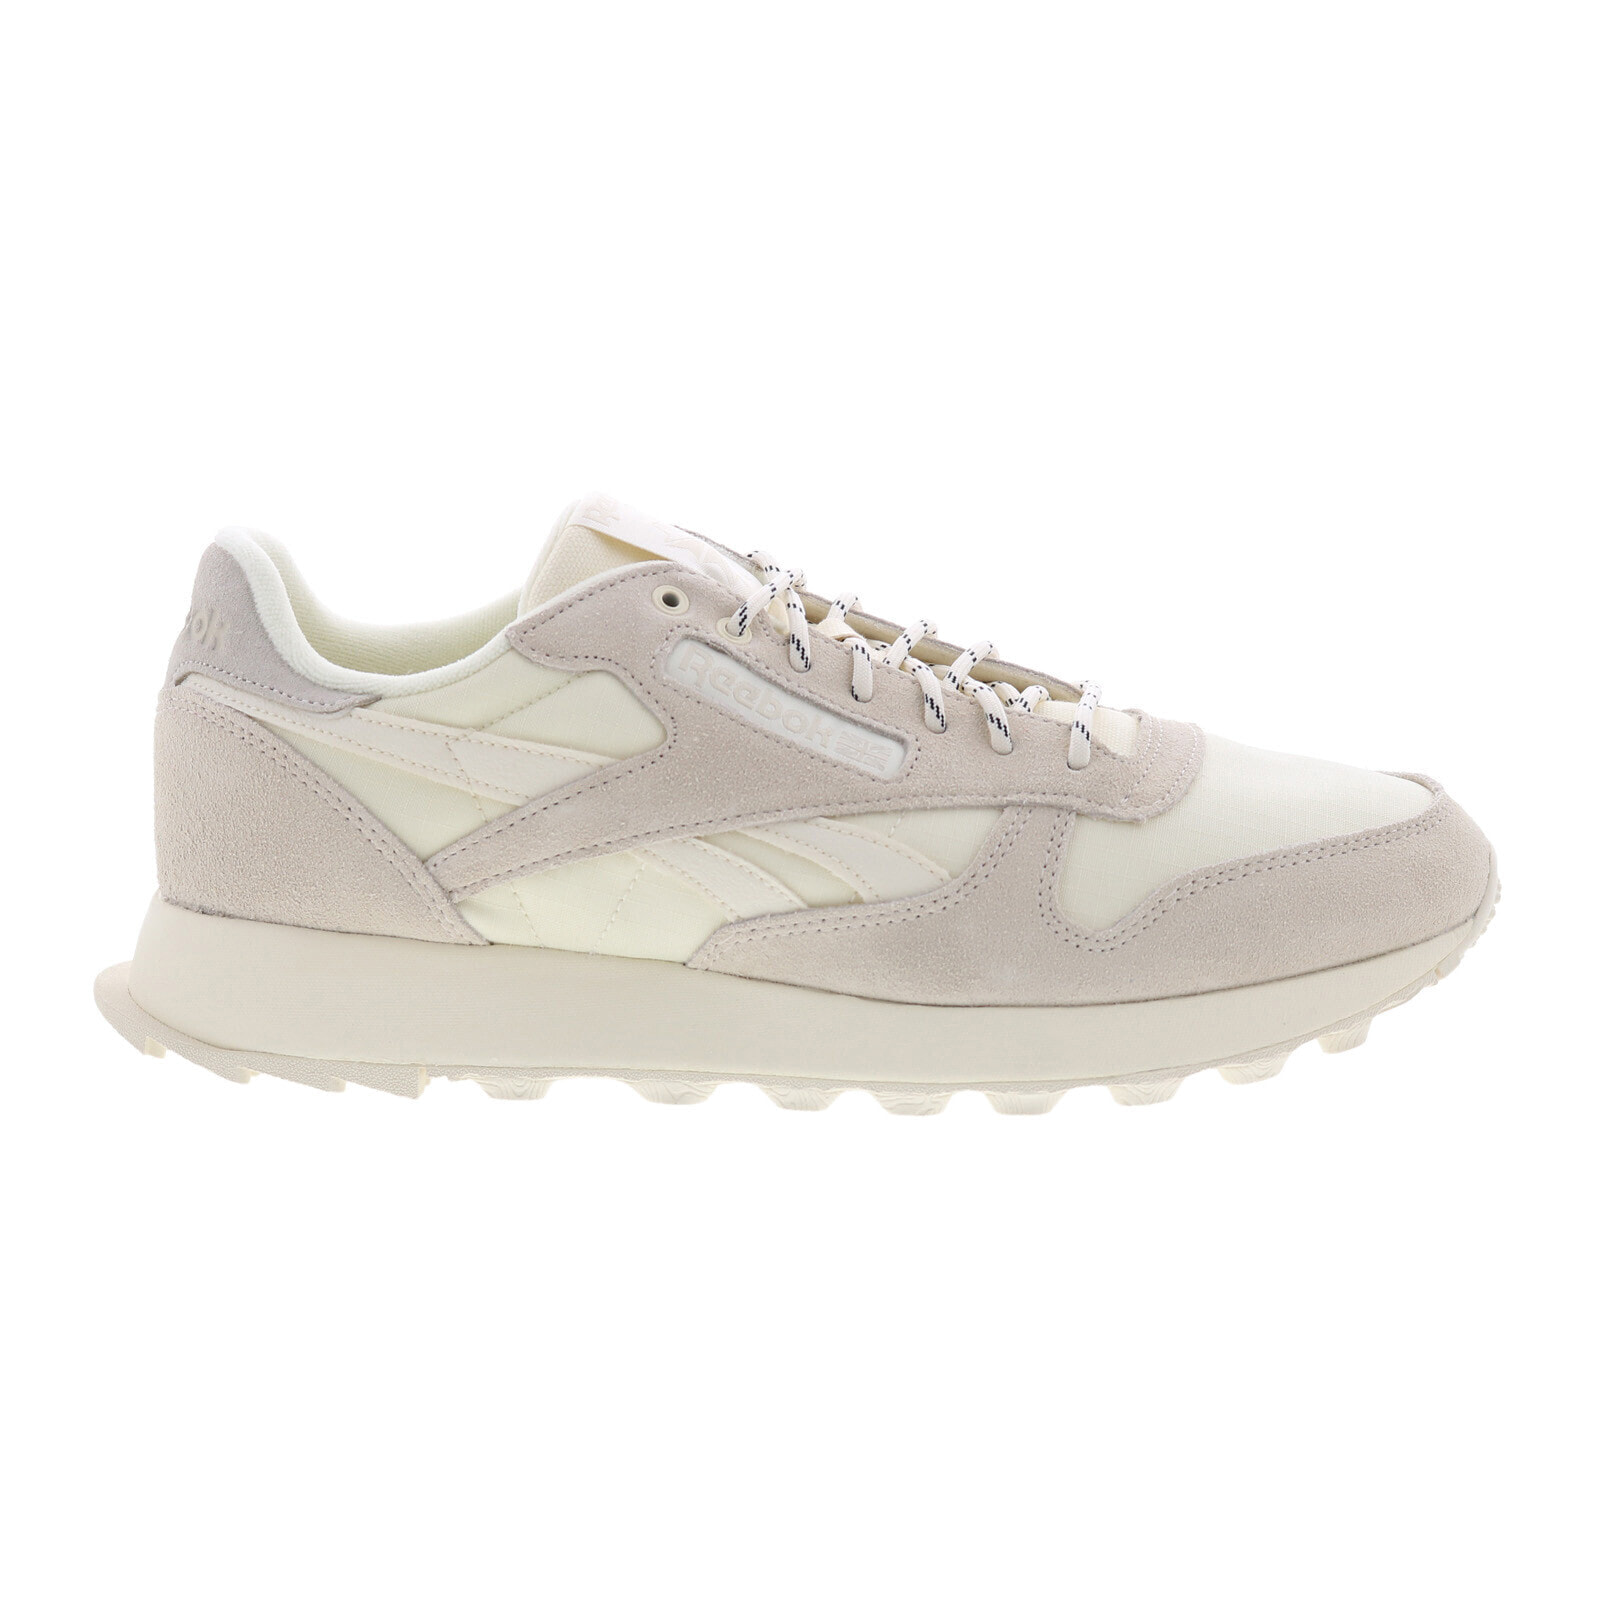 Reebok Classic Leather GY1527 Mens Beige Suede Lifestyle Sneakers Shoes